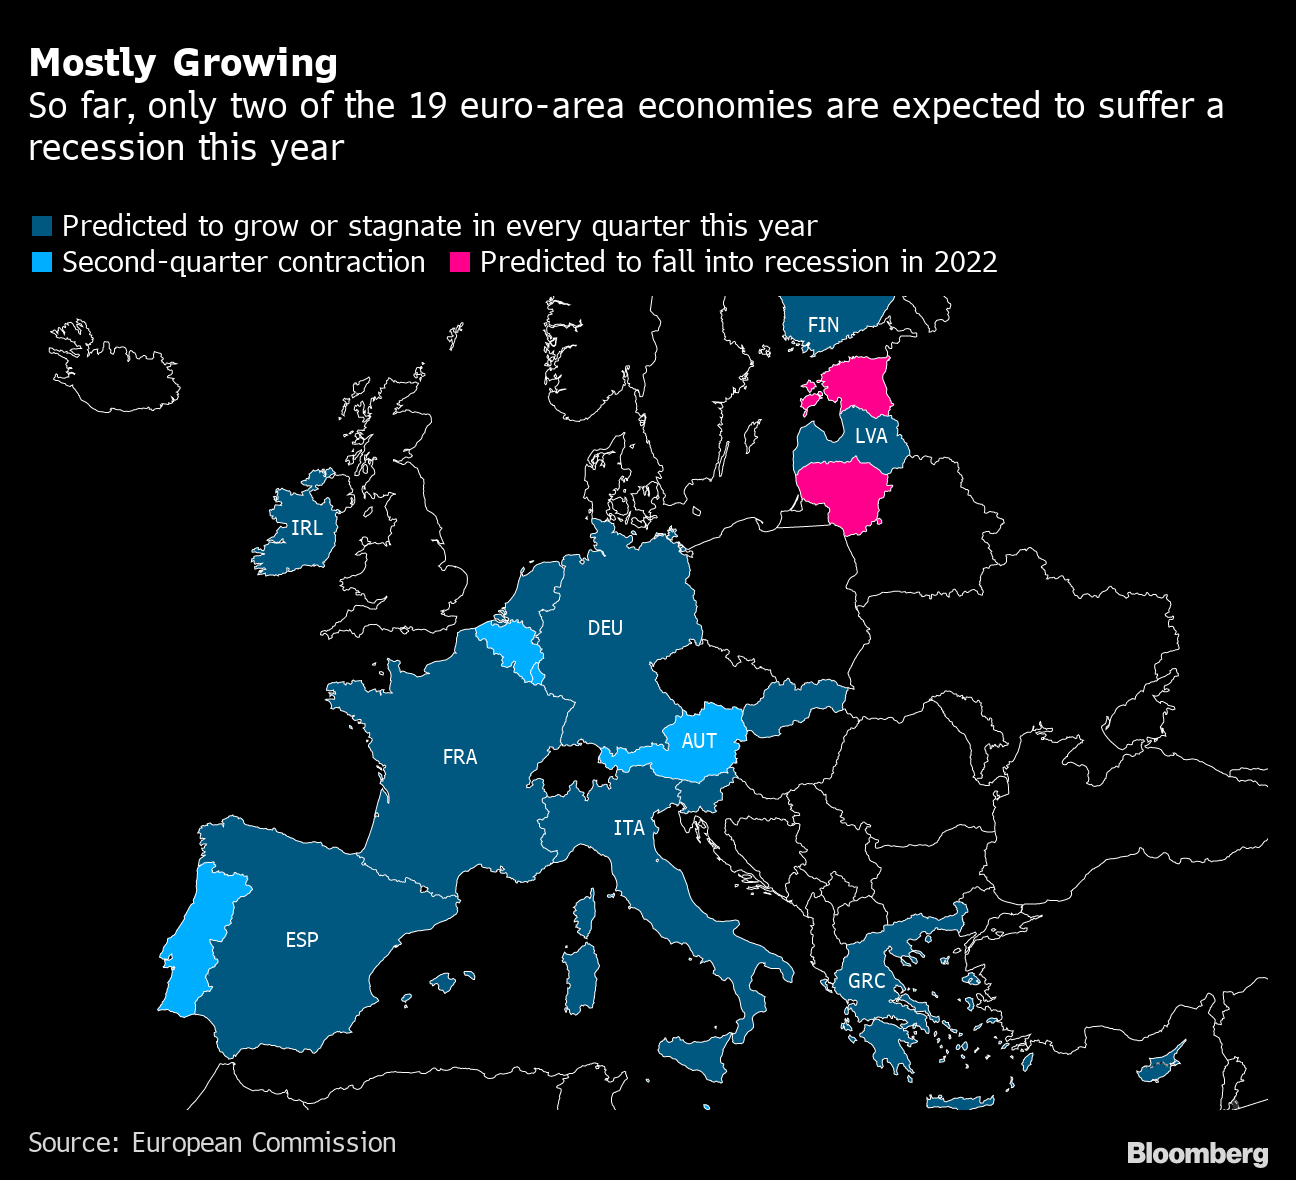 Europe's Impending Recession Leaves ECB in Deeper Policy Bind - Bloomberg